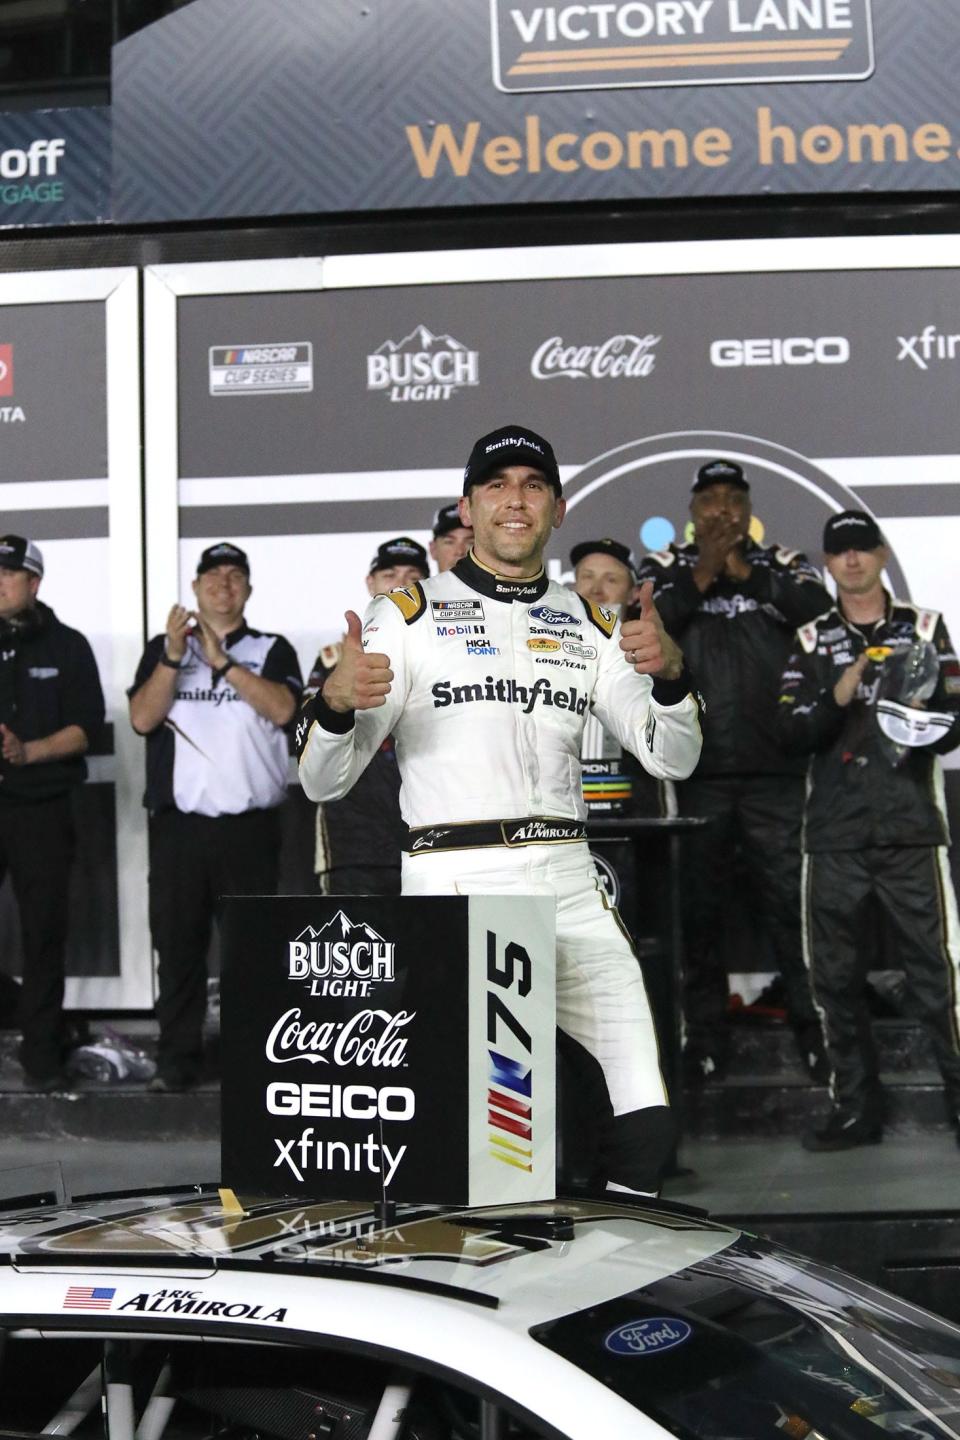 Aric Almirola prevailed in a hectic, late battle to the end, claiming a victory in the second Bluegreen Vacations Duel race on Thursday night at Daytona.